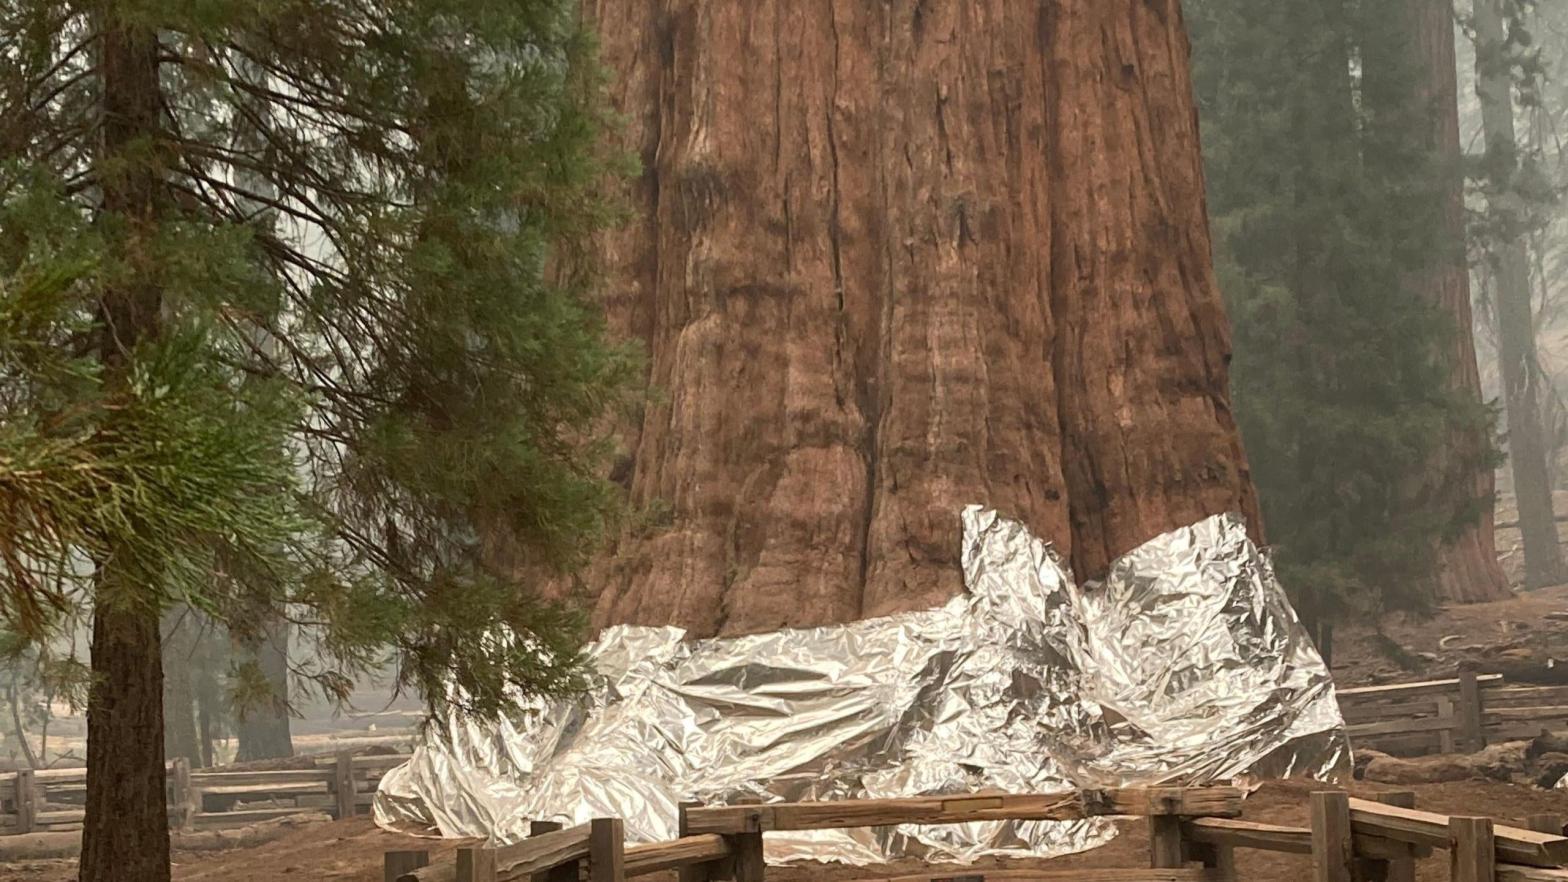 The base of General Sherman, the largest living organism on Earth, wrapped in foil to protect it from the KNP Complex Fire. (Photo: Inciweb/NPS)